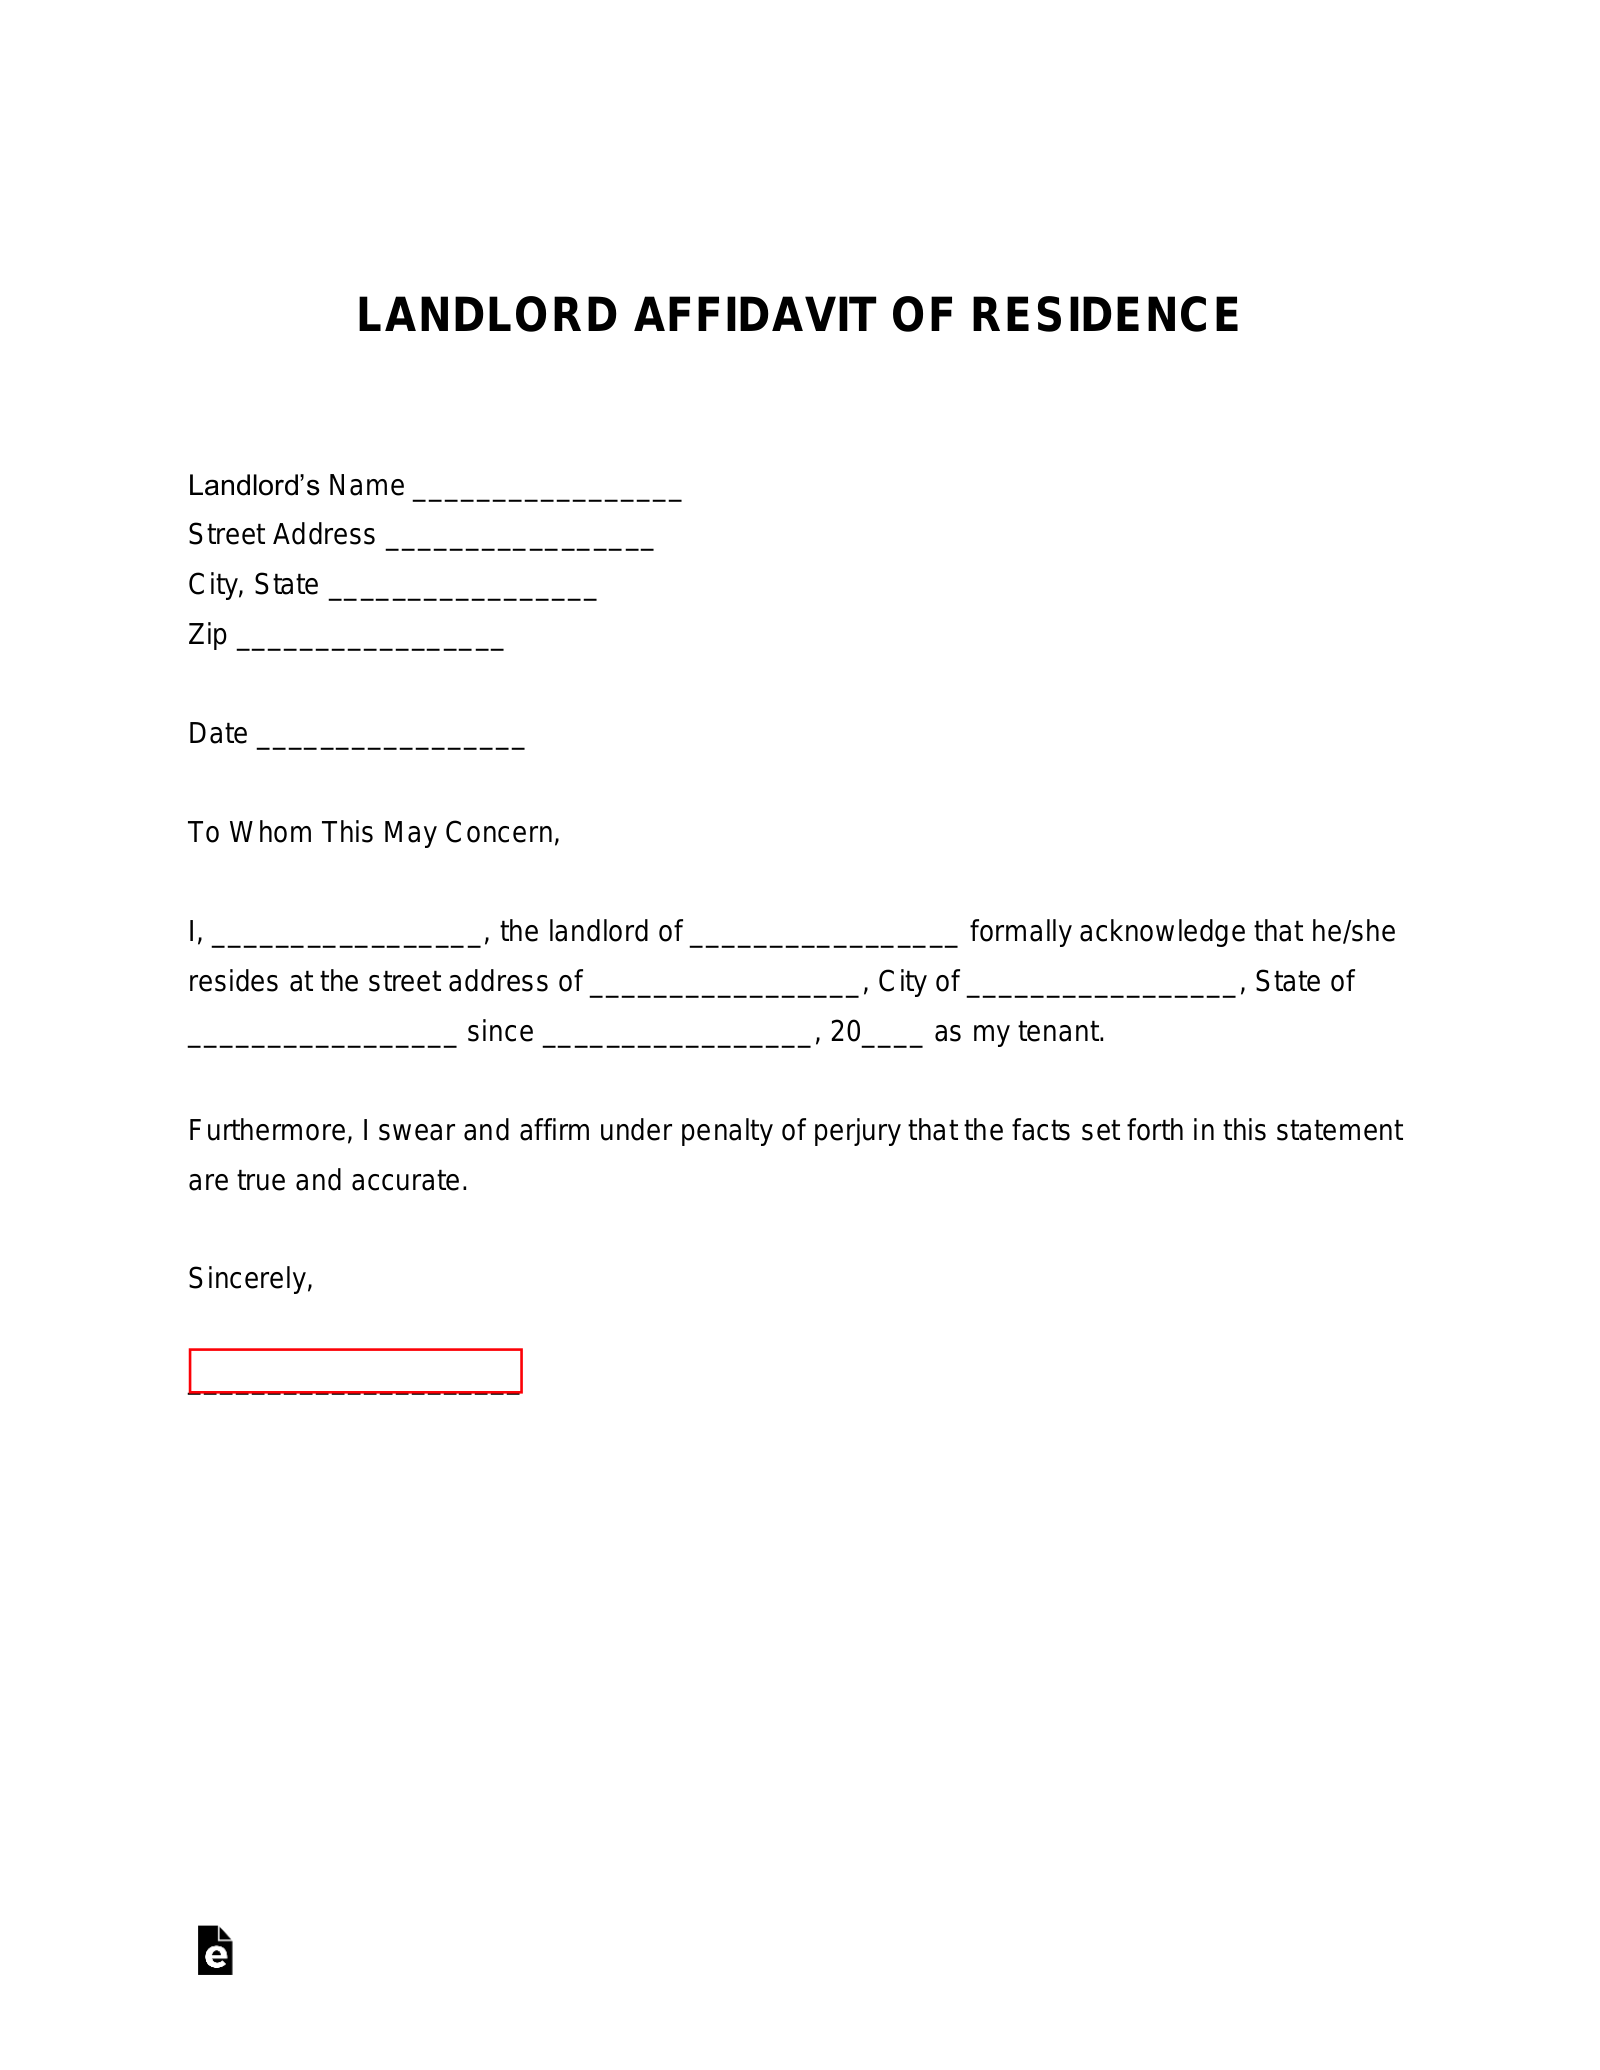 Proof Of Residency Letter From Landlord from eforms.com